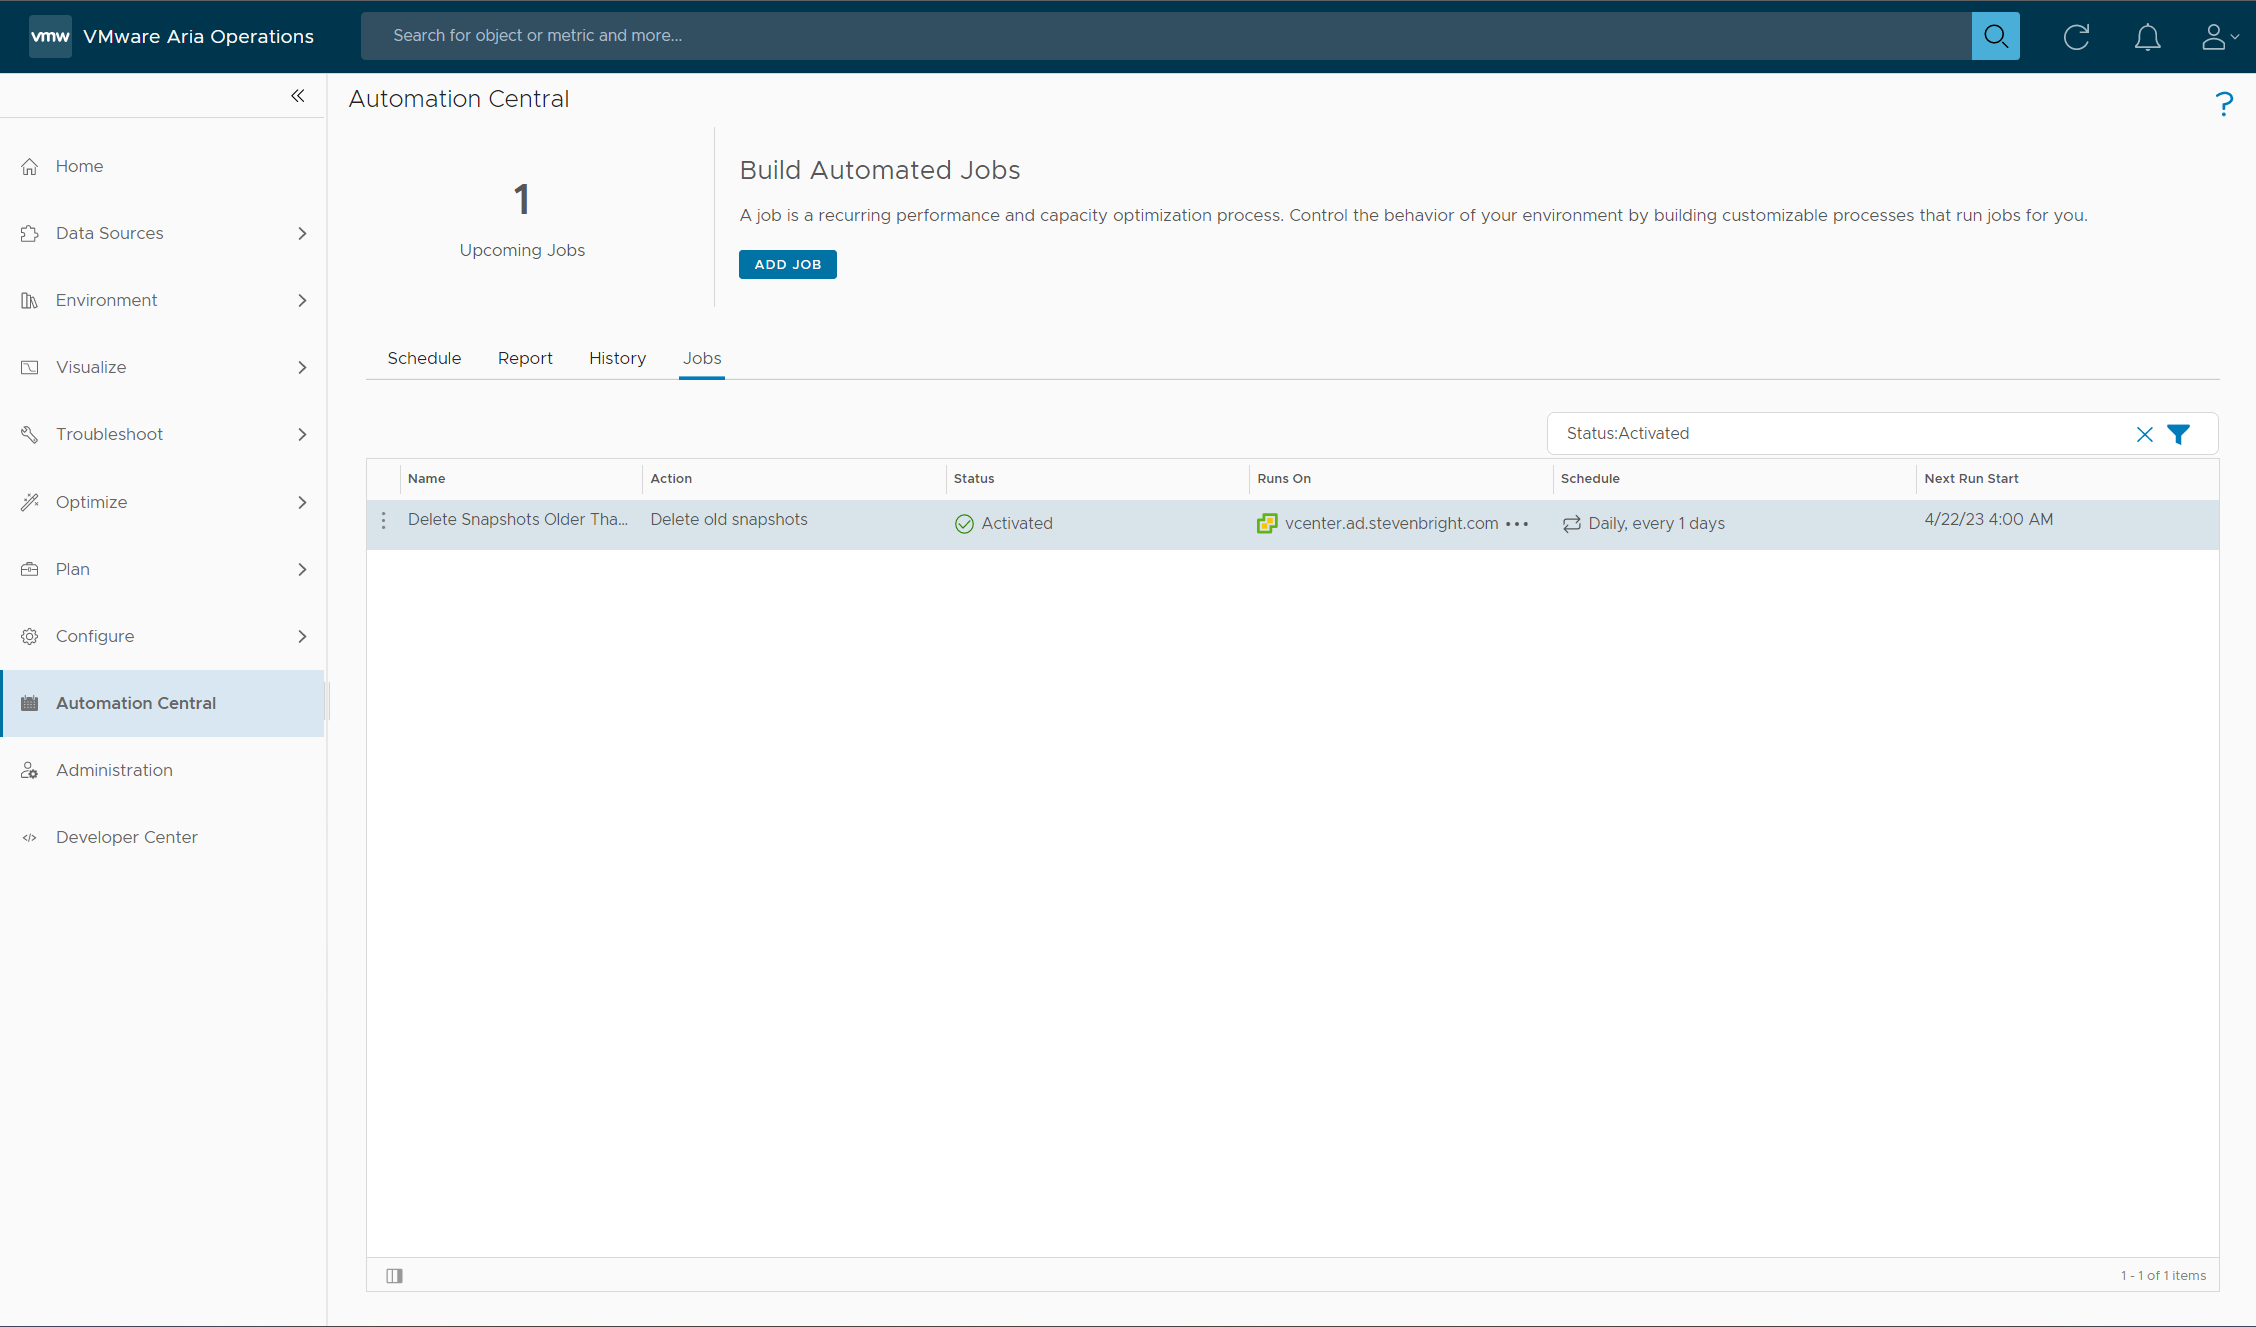 Screenshot of the VMware Aria Operations Automation Central Jobs List